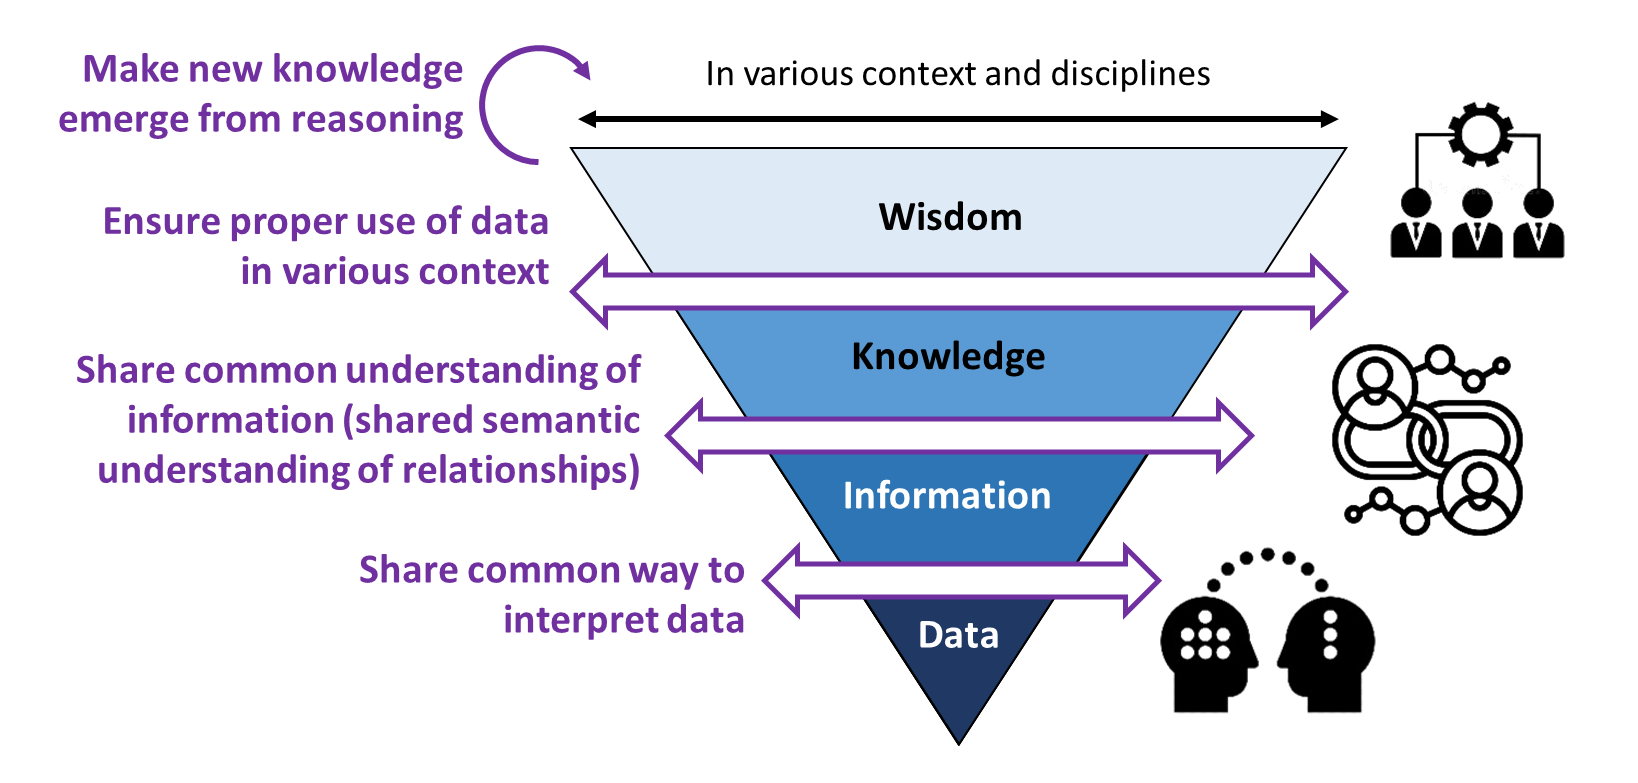 Illustration for the Knowledge Management Working group